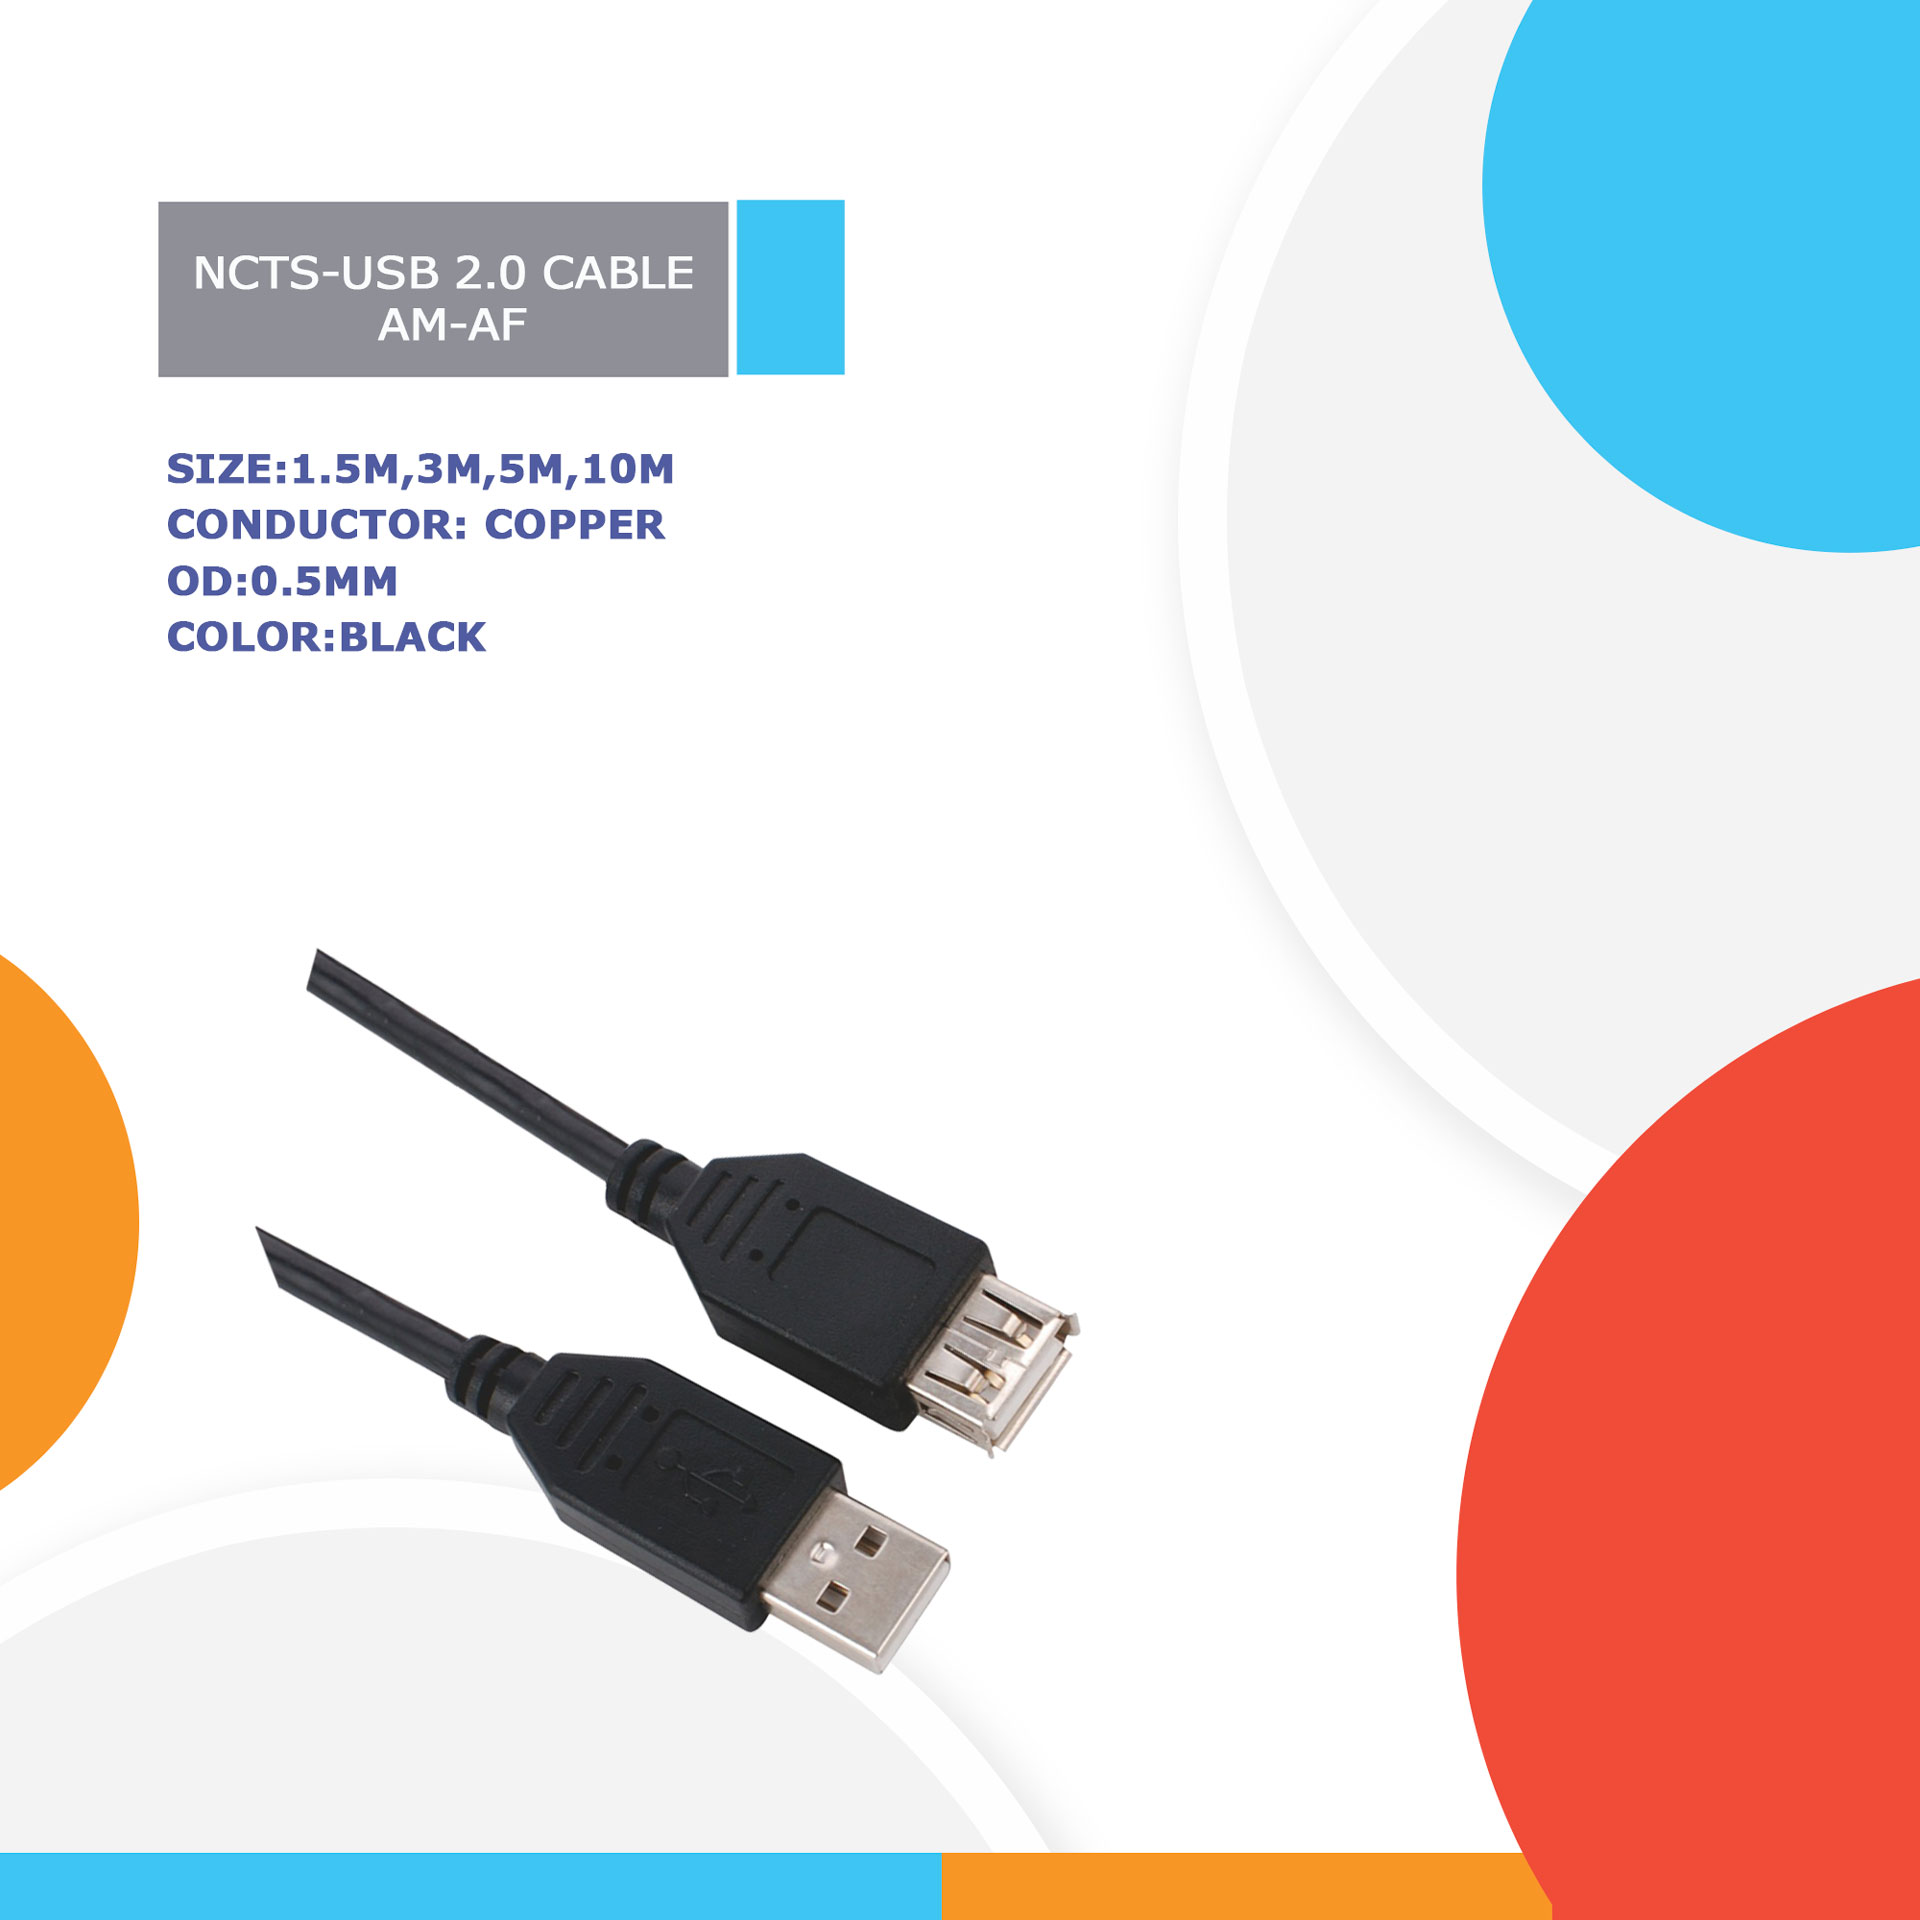 NCTS-USB-2.0-CABLE-AM-AF